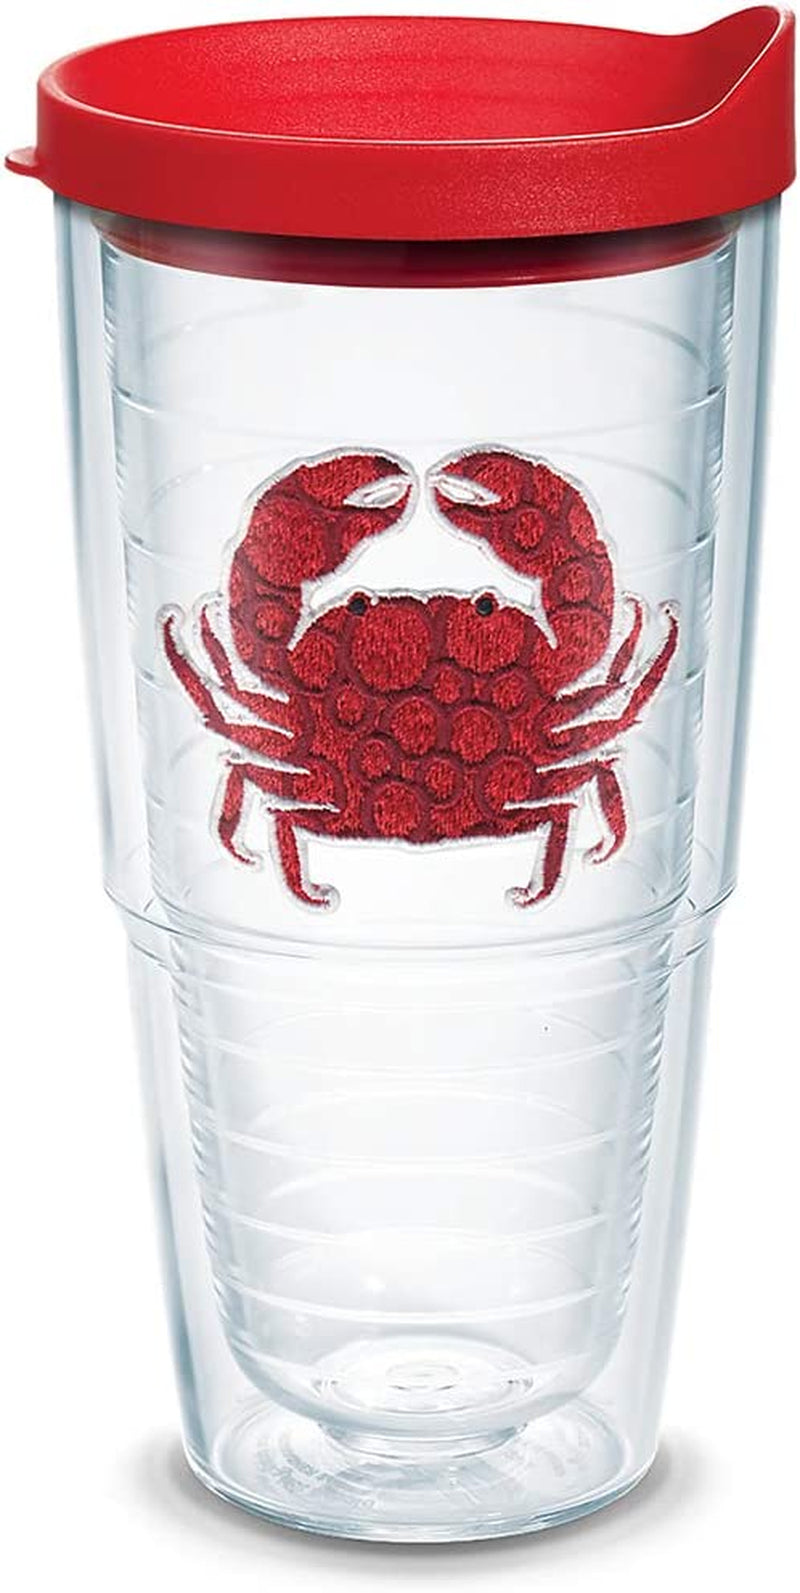 Tervis Crab Insulated Tumbler with Emblem and Red Lid, 16 Oz, Clear Home & Garden > Kitchen & Dining > Tableware > Drinkware Tervis Red Lid 24oz 